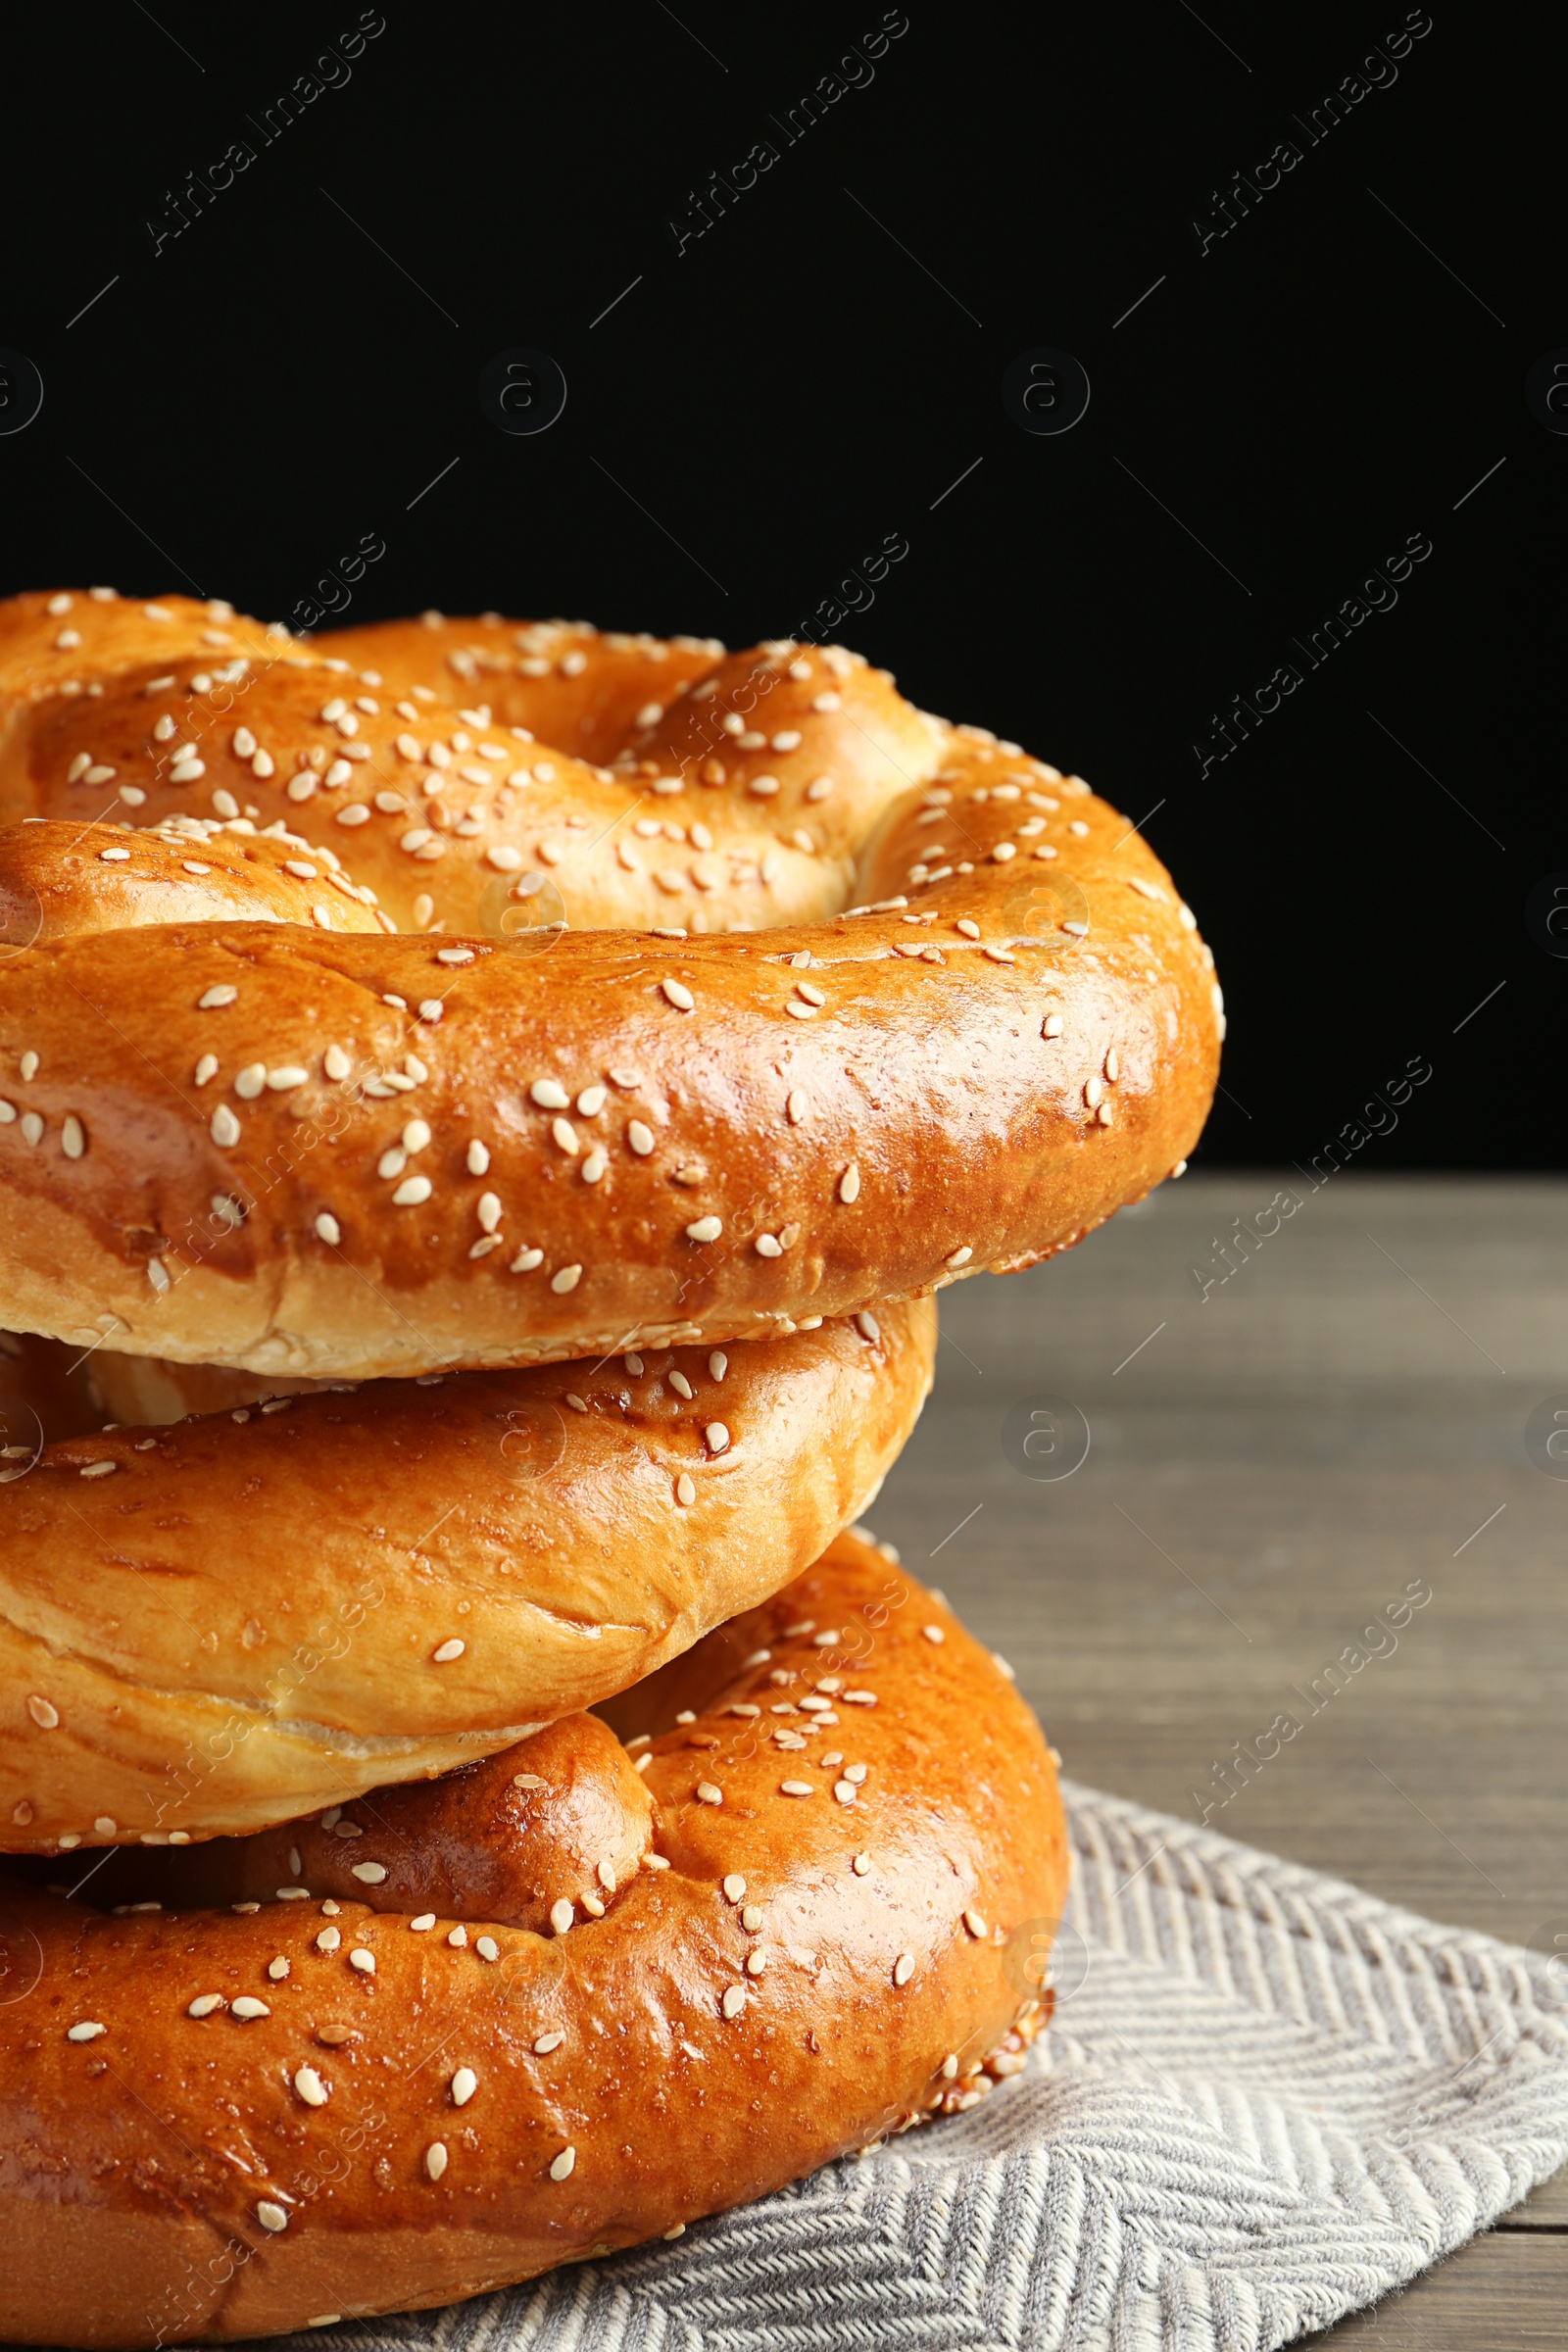 Photo of Tasty freshly baked pretzels on wooden table against black background, closeup